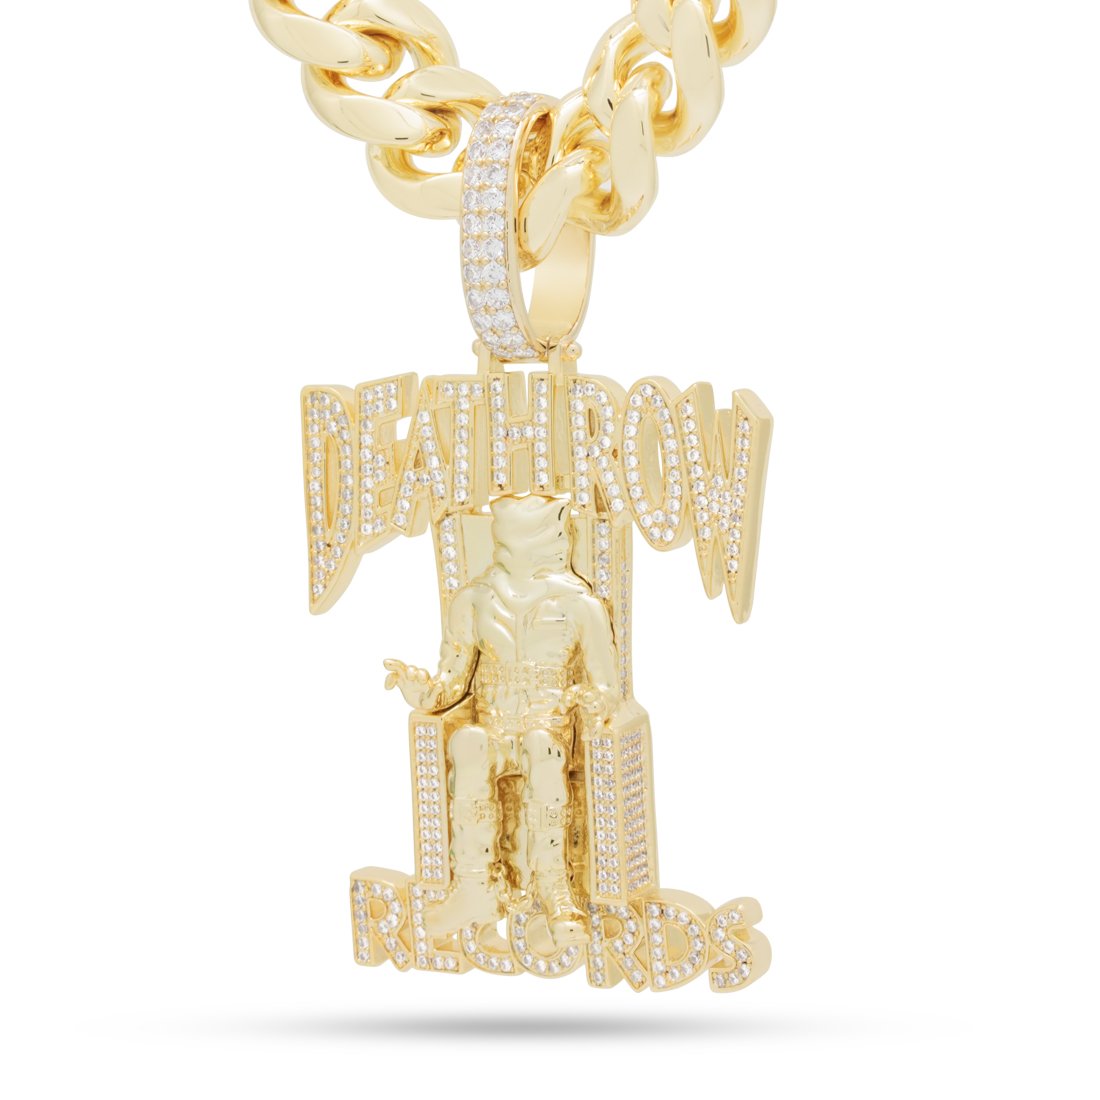 Death Row Records x King Ice - Iced Logo Necklace